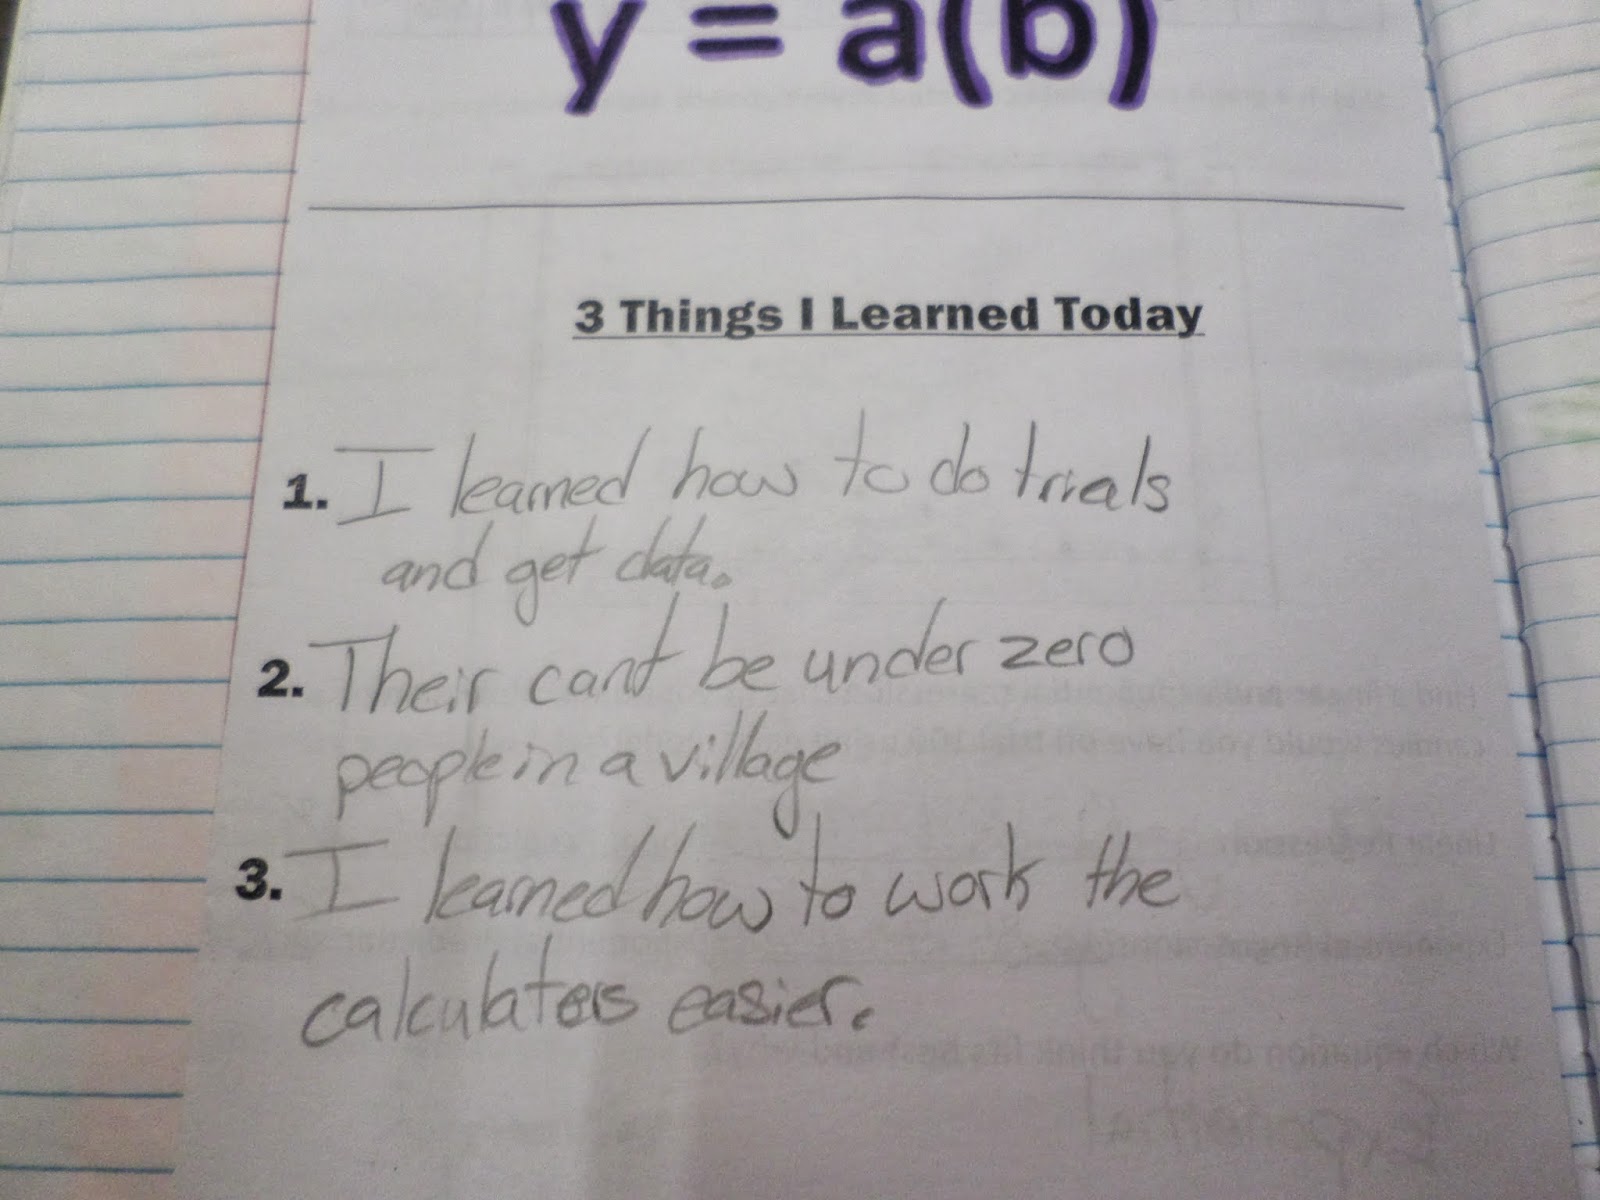 3 Things I learned today section of notes. 